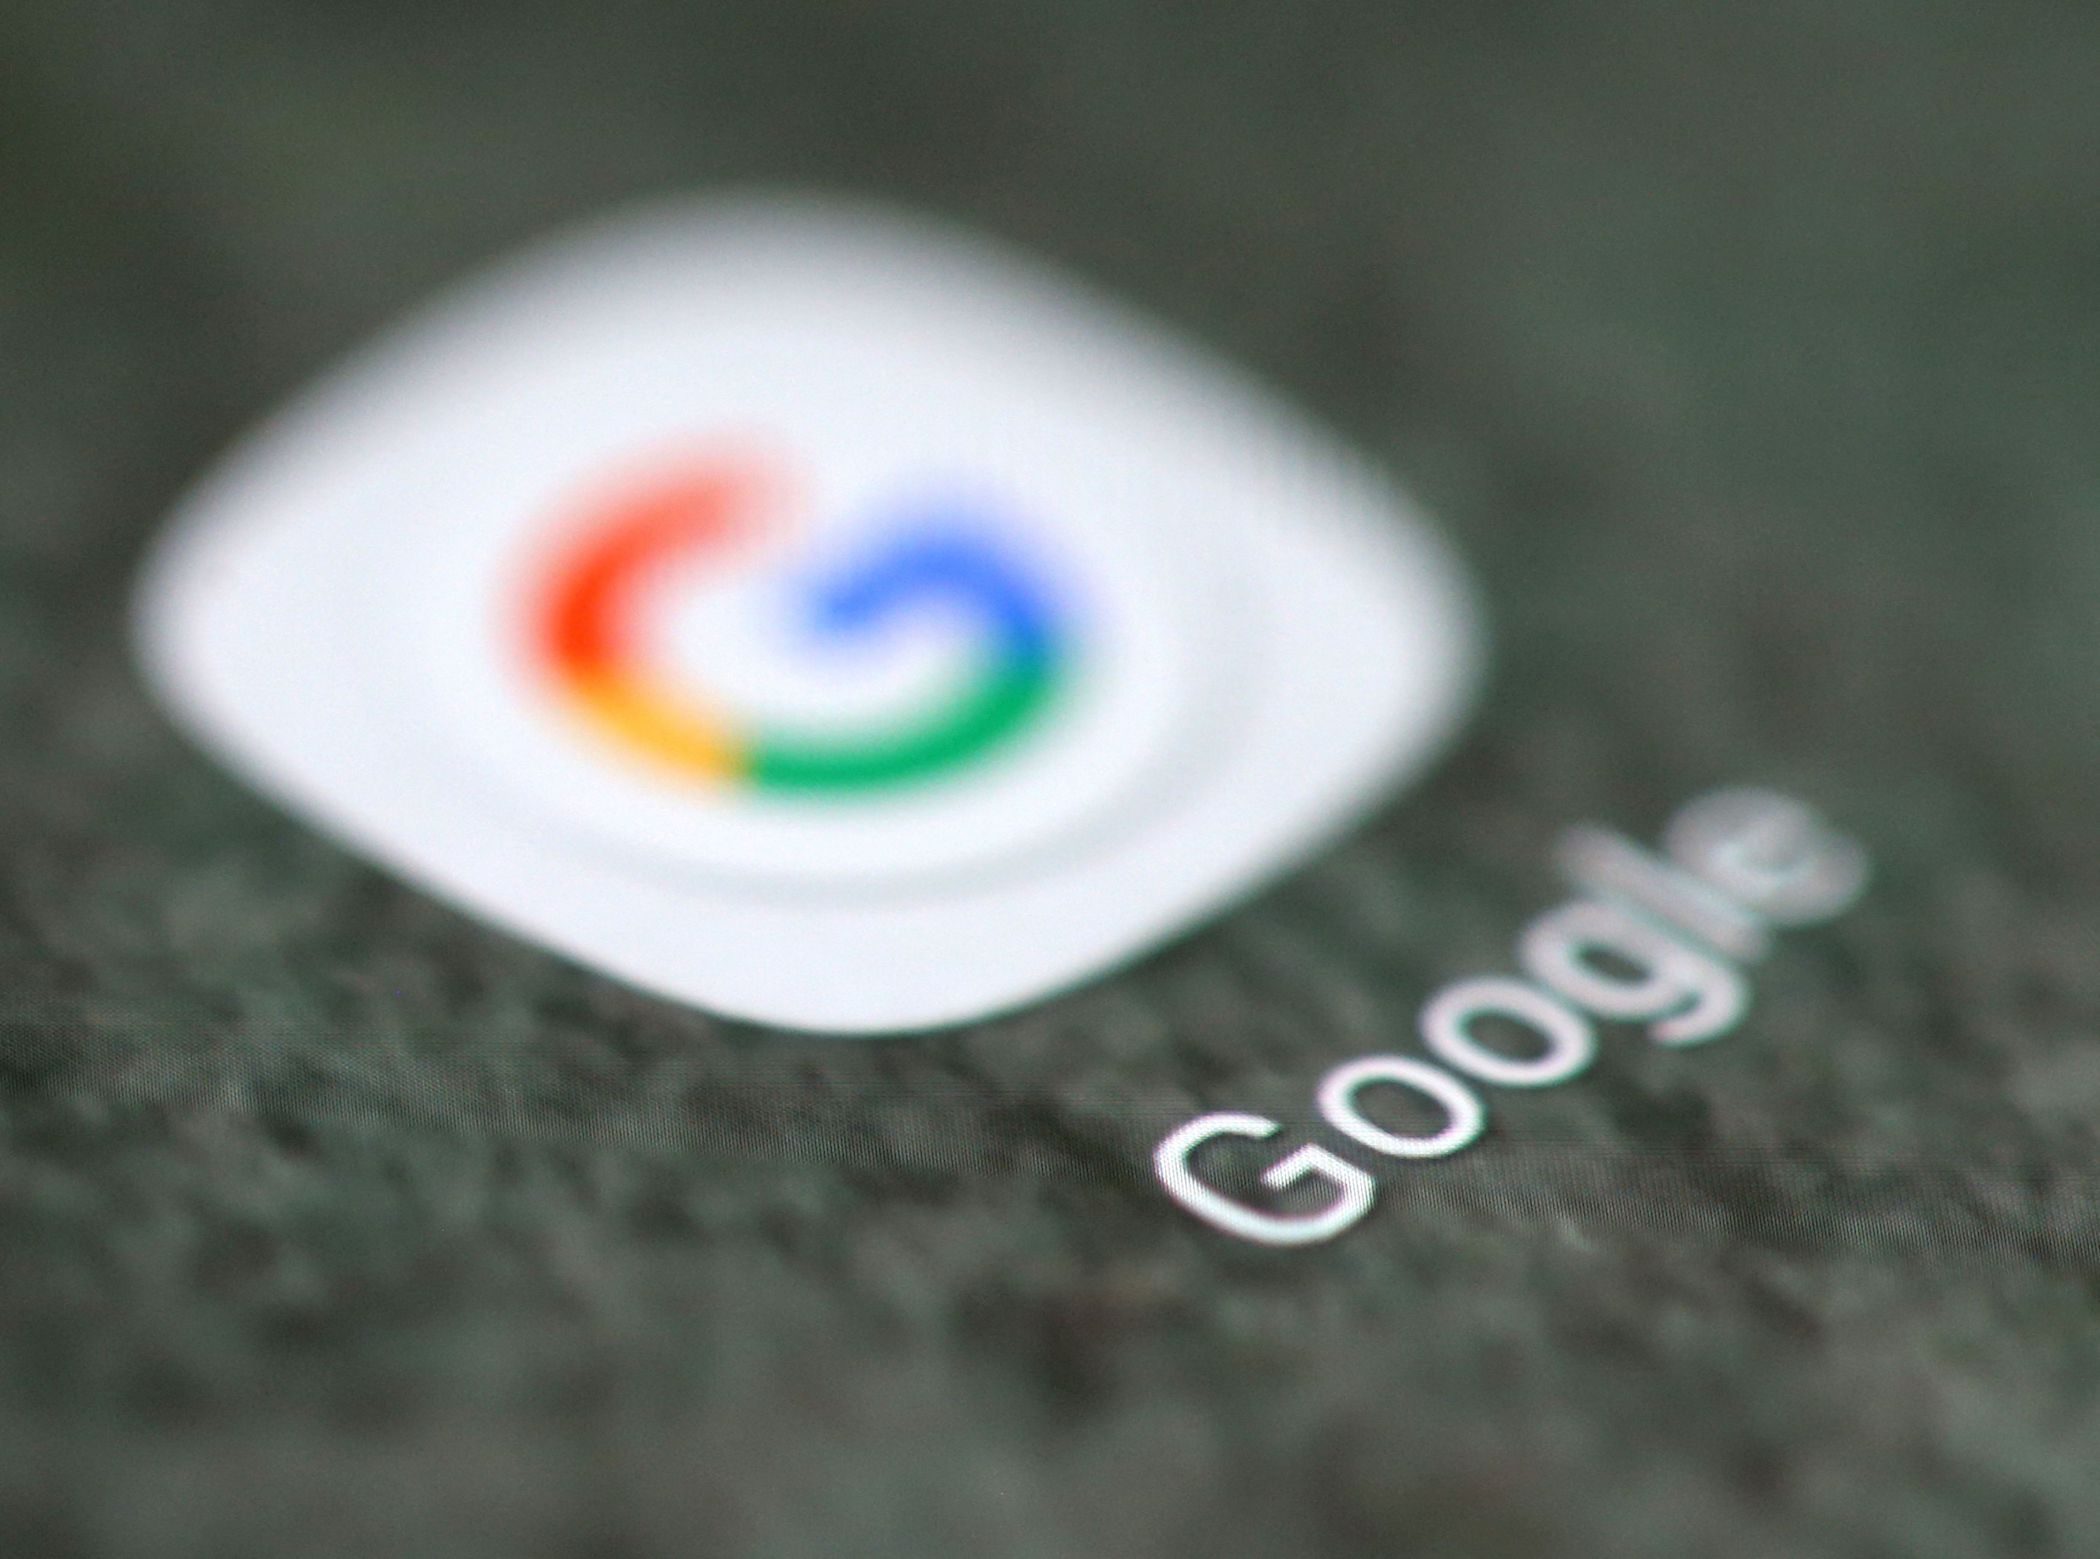 Google to delete location history of visits to abortion clinics